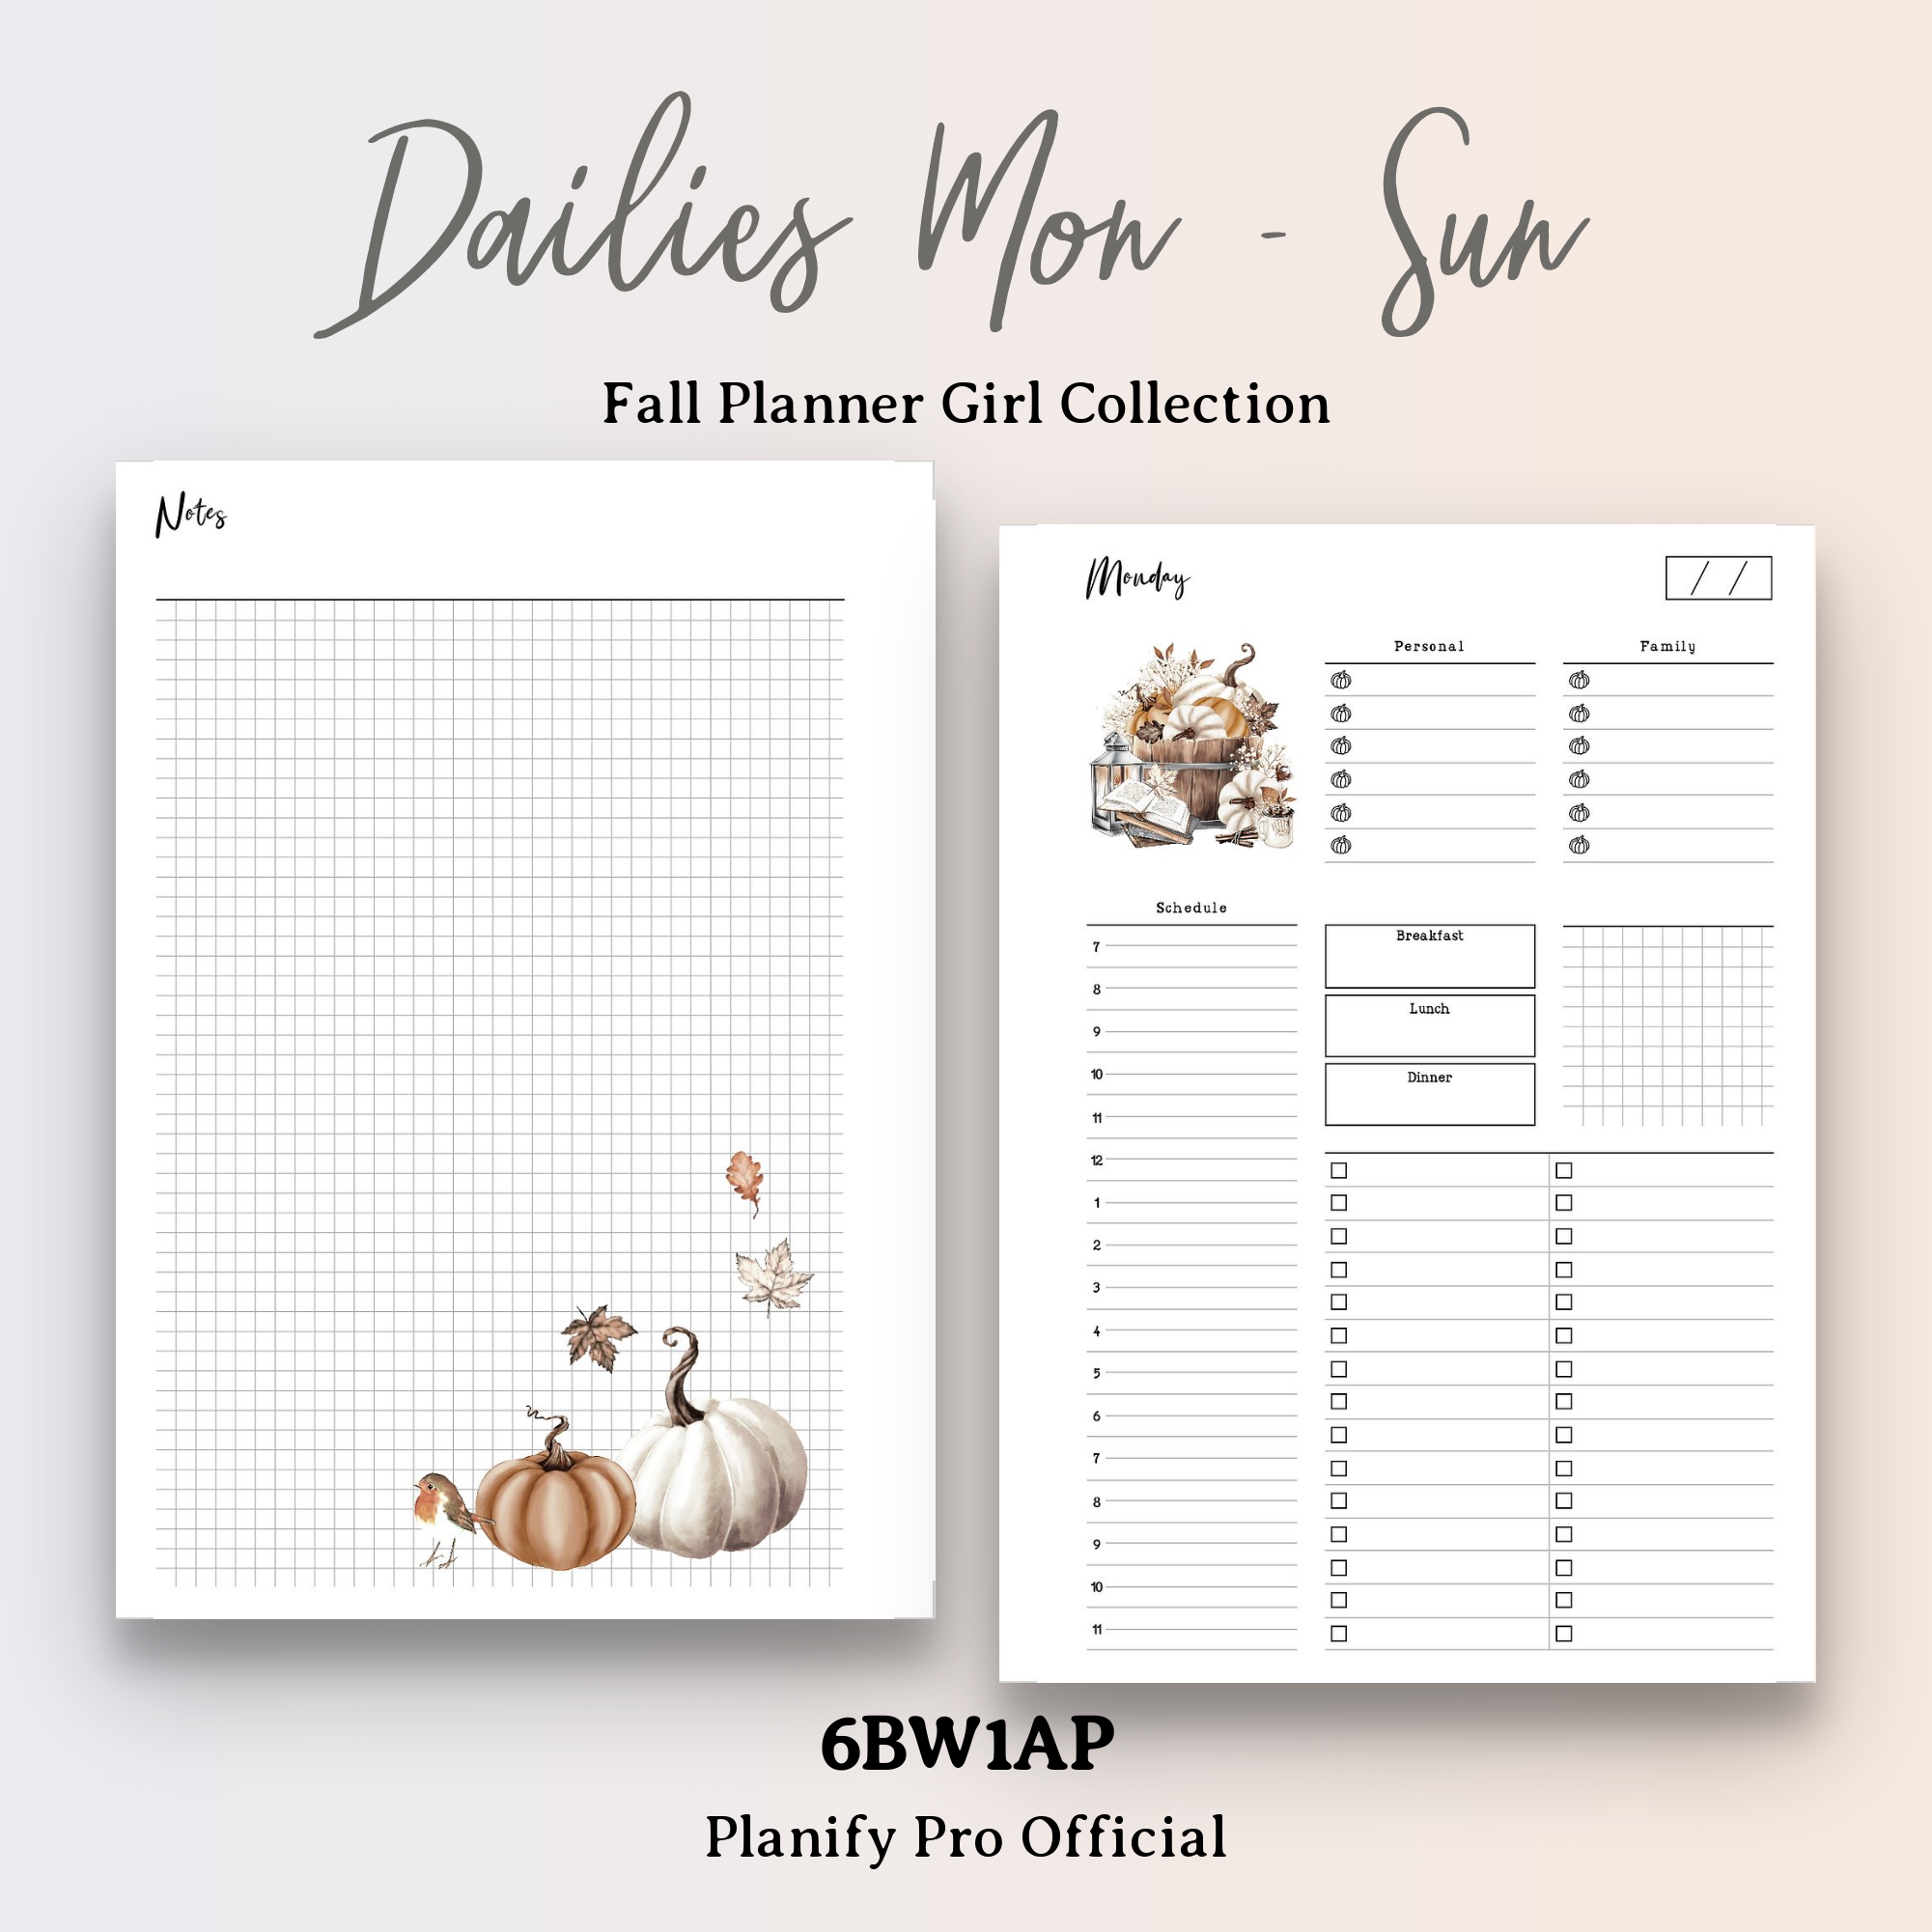 FALL PLANNER GIRL DECO CLEAR STICKERS - RE002 – KeenaPrints